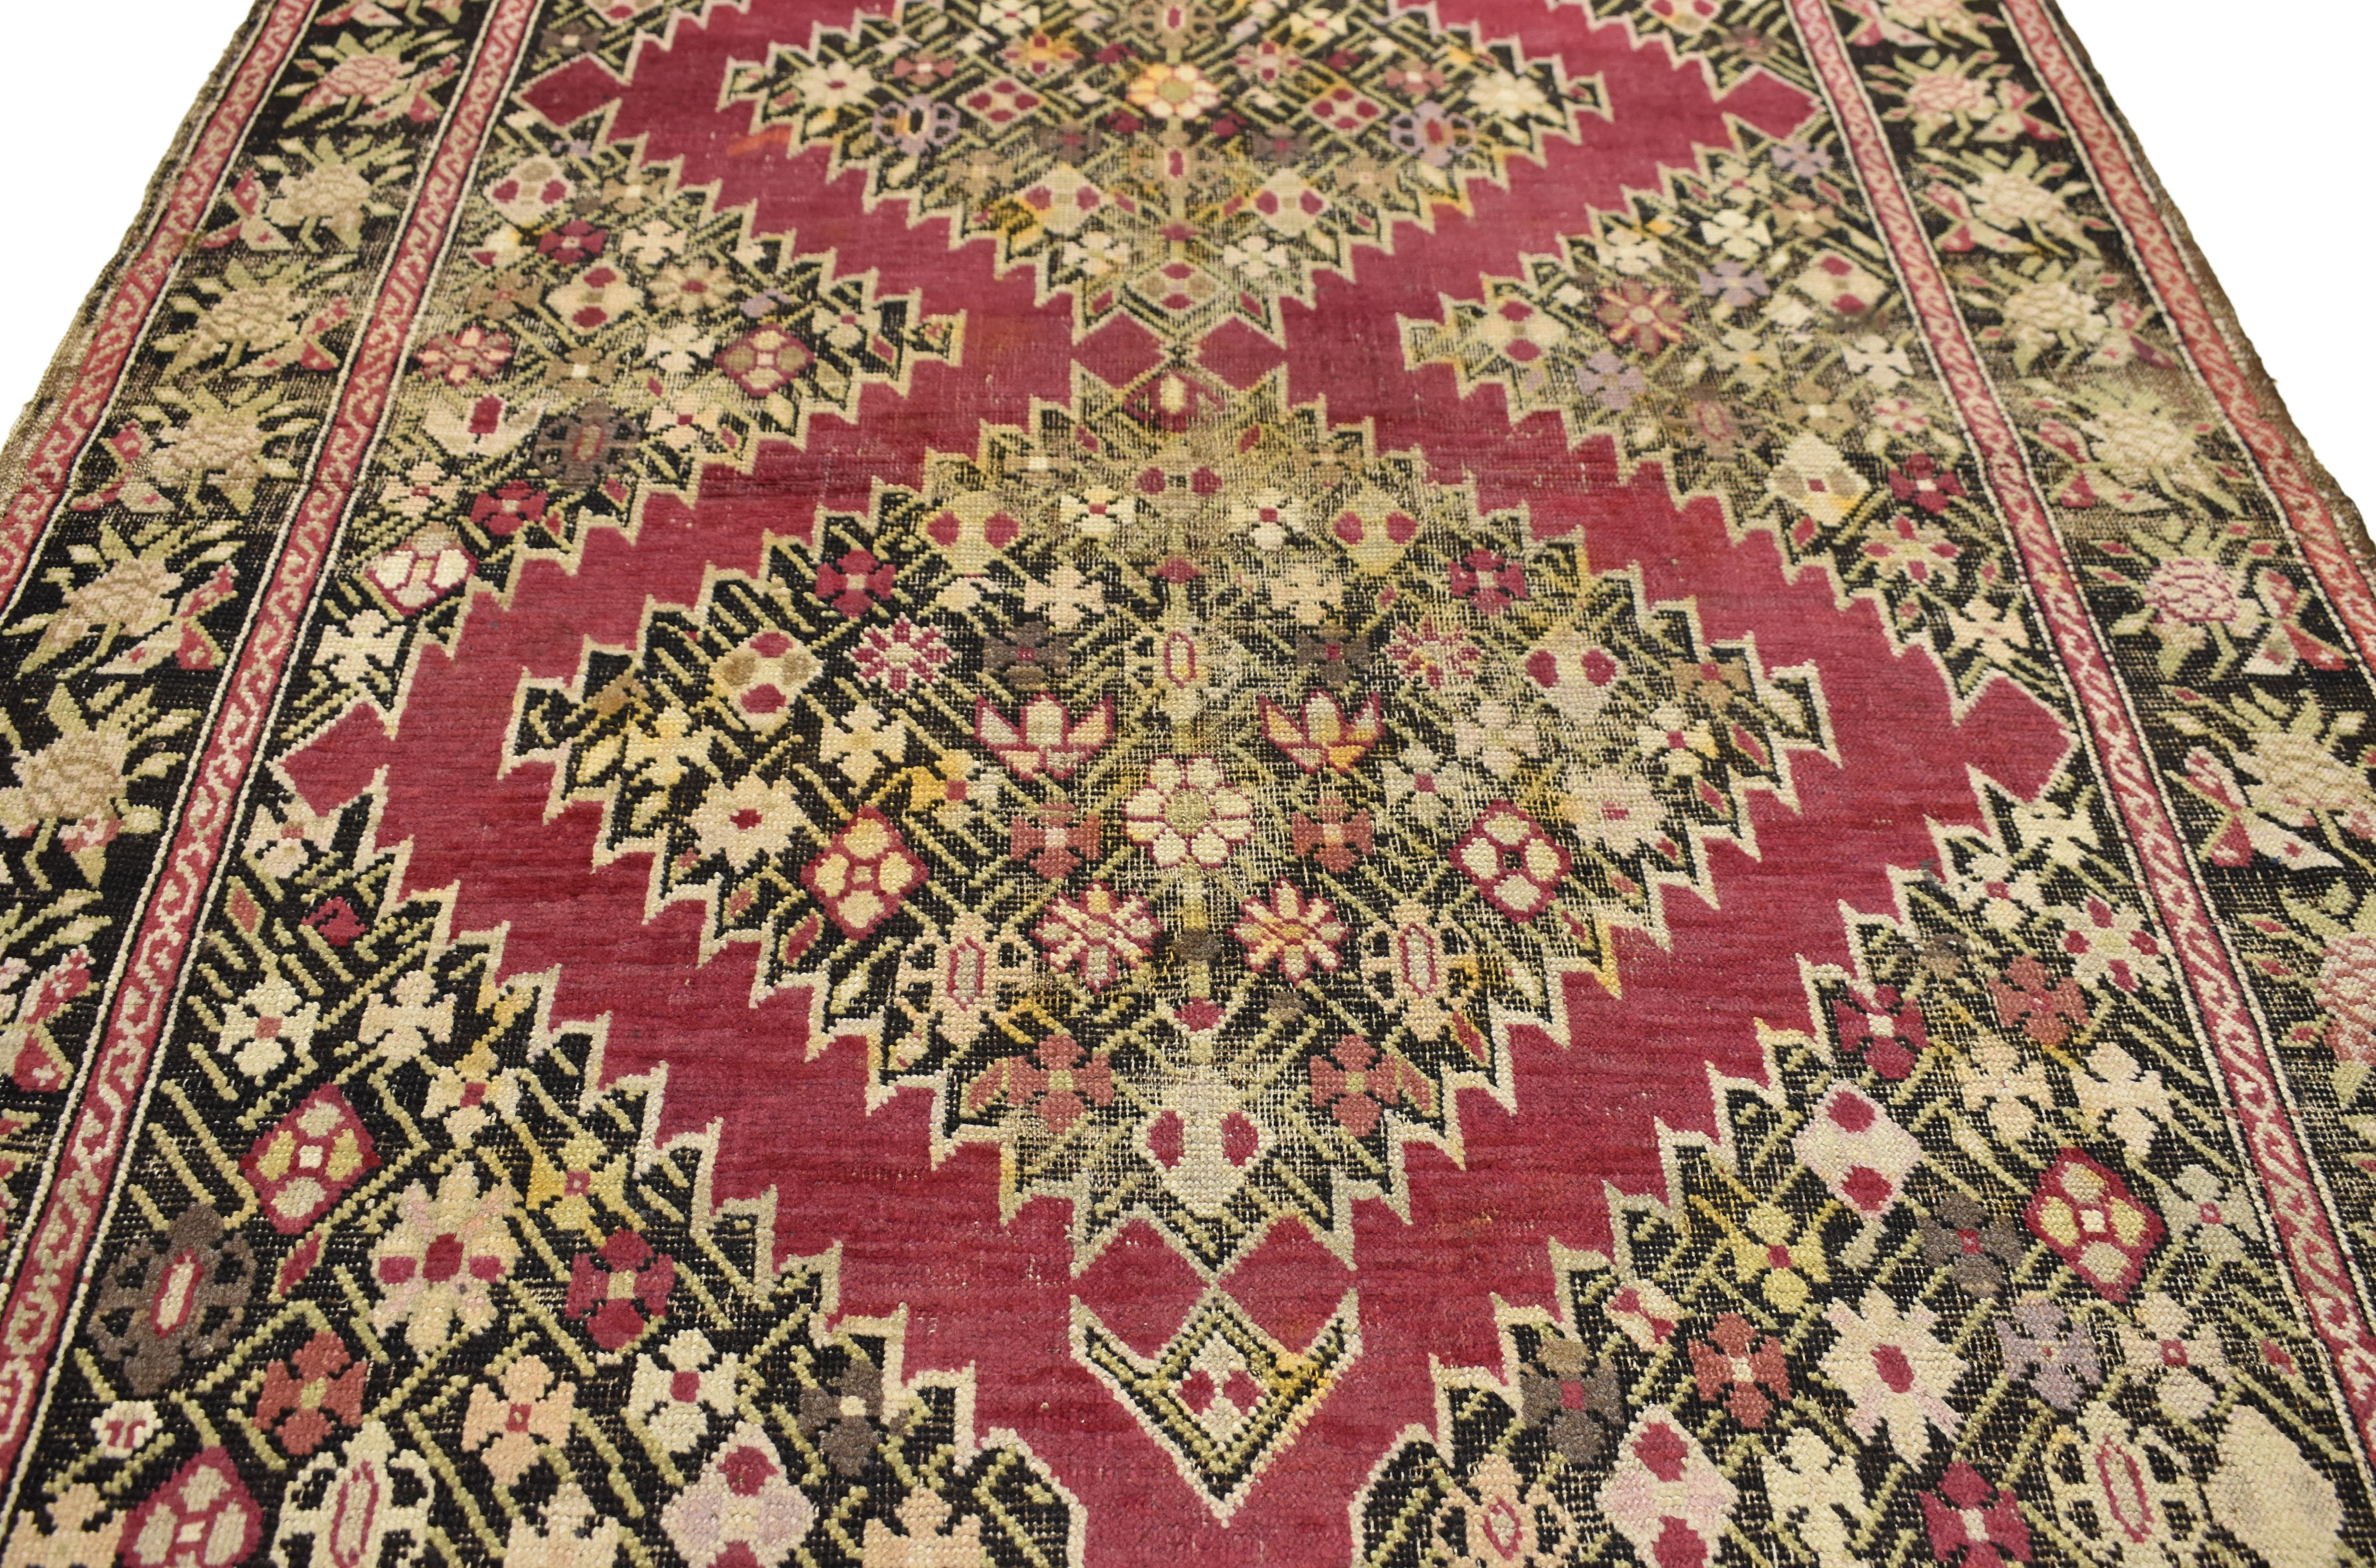 74295, antique Persian Karabakh rug, Persian Gharabagh accent rug with old world style. This hand-knotted wool antique Persian Karabakh rug features double lozenge medallions filled with stylized flowers and rectilinear vines. The lozenge medallions